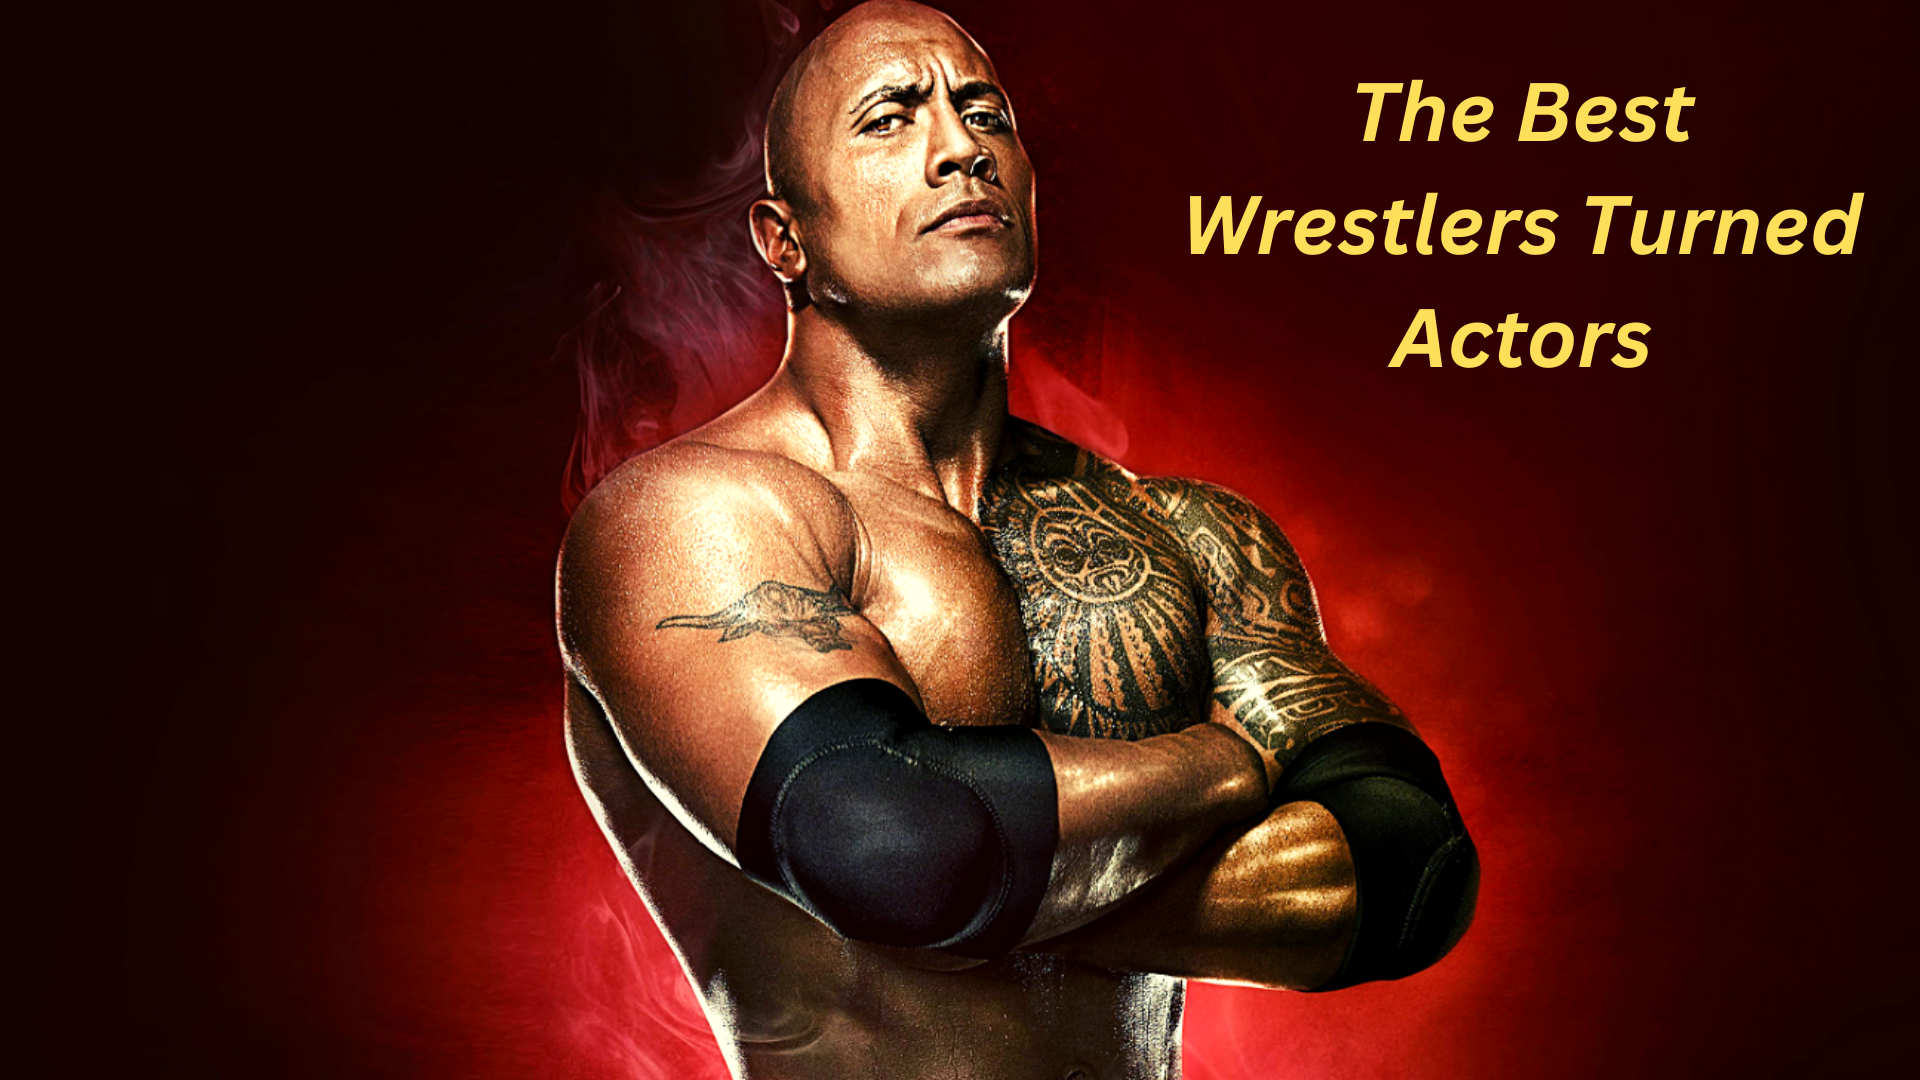 The Best Wrestlers Turned Actors